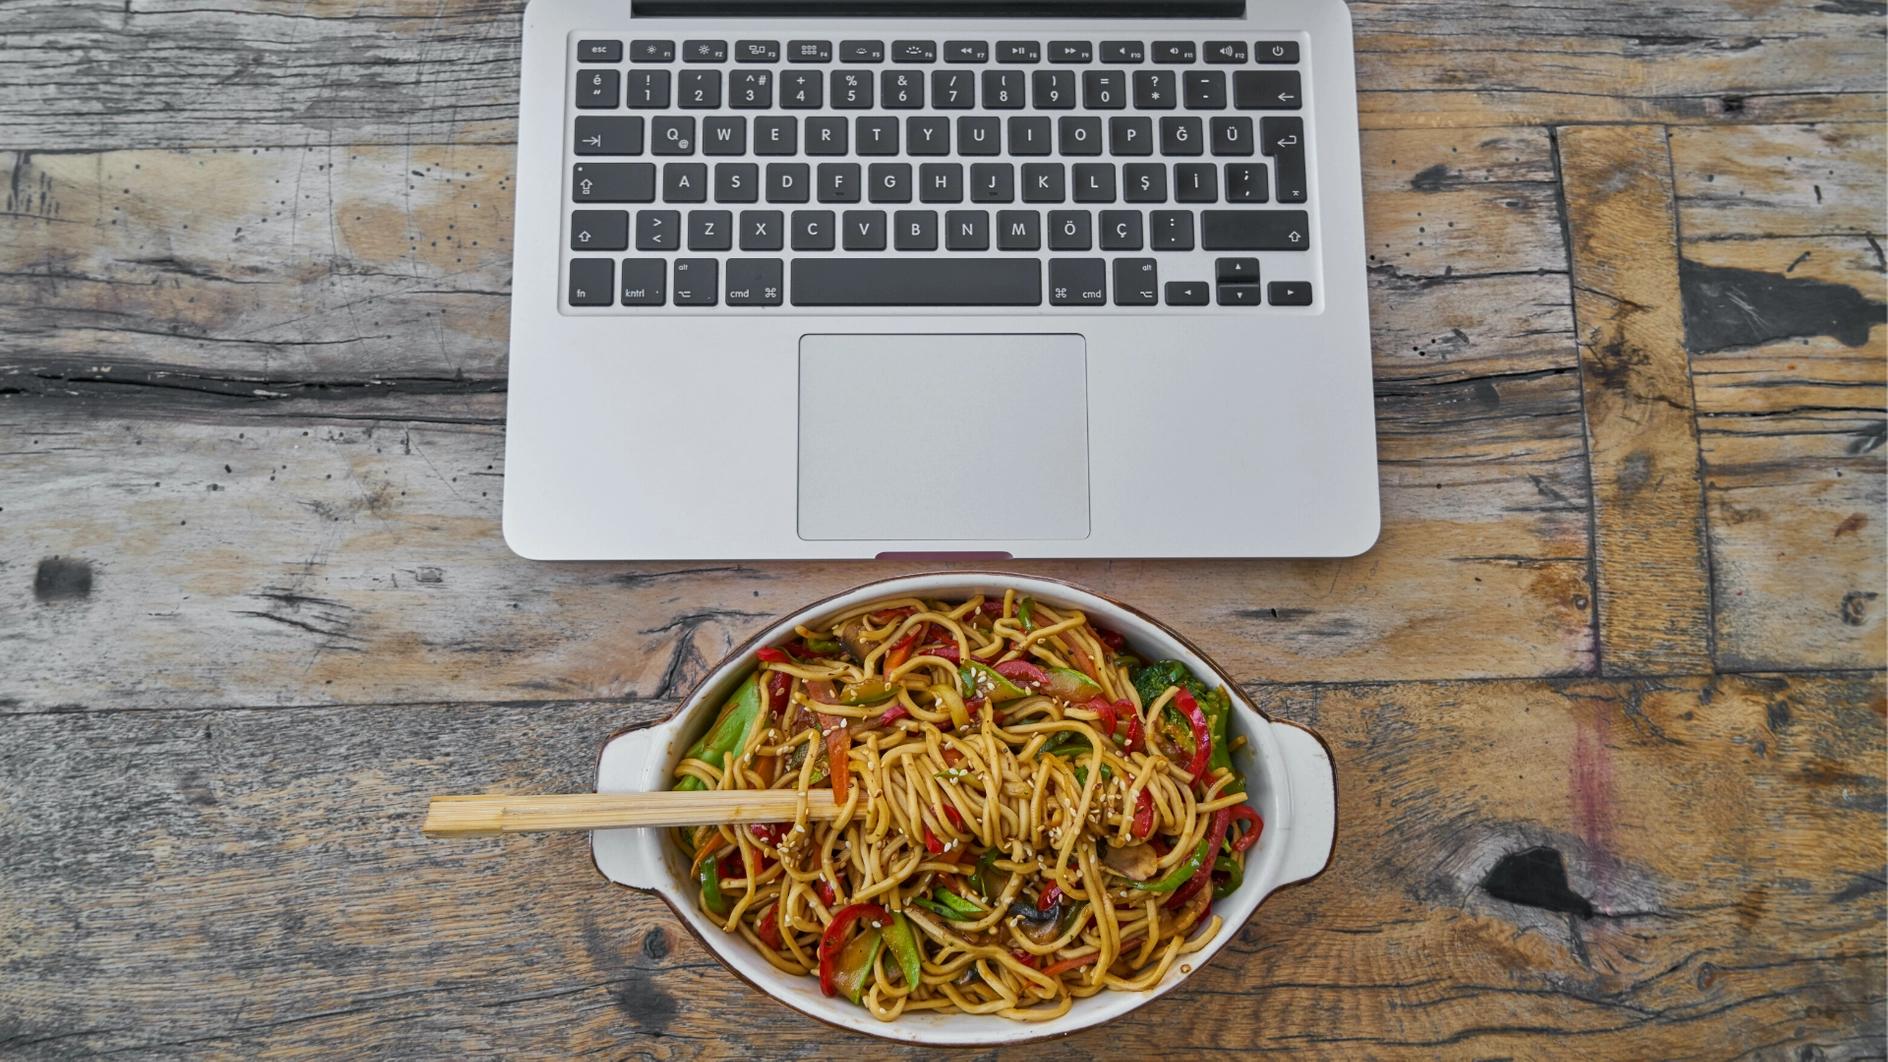 Image showing laptop and a plate of noodles